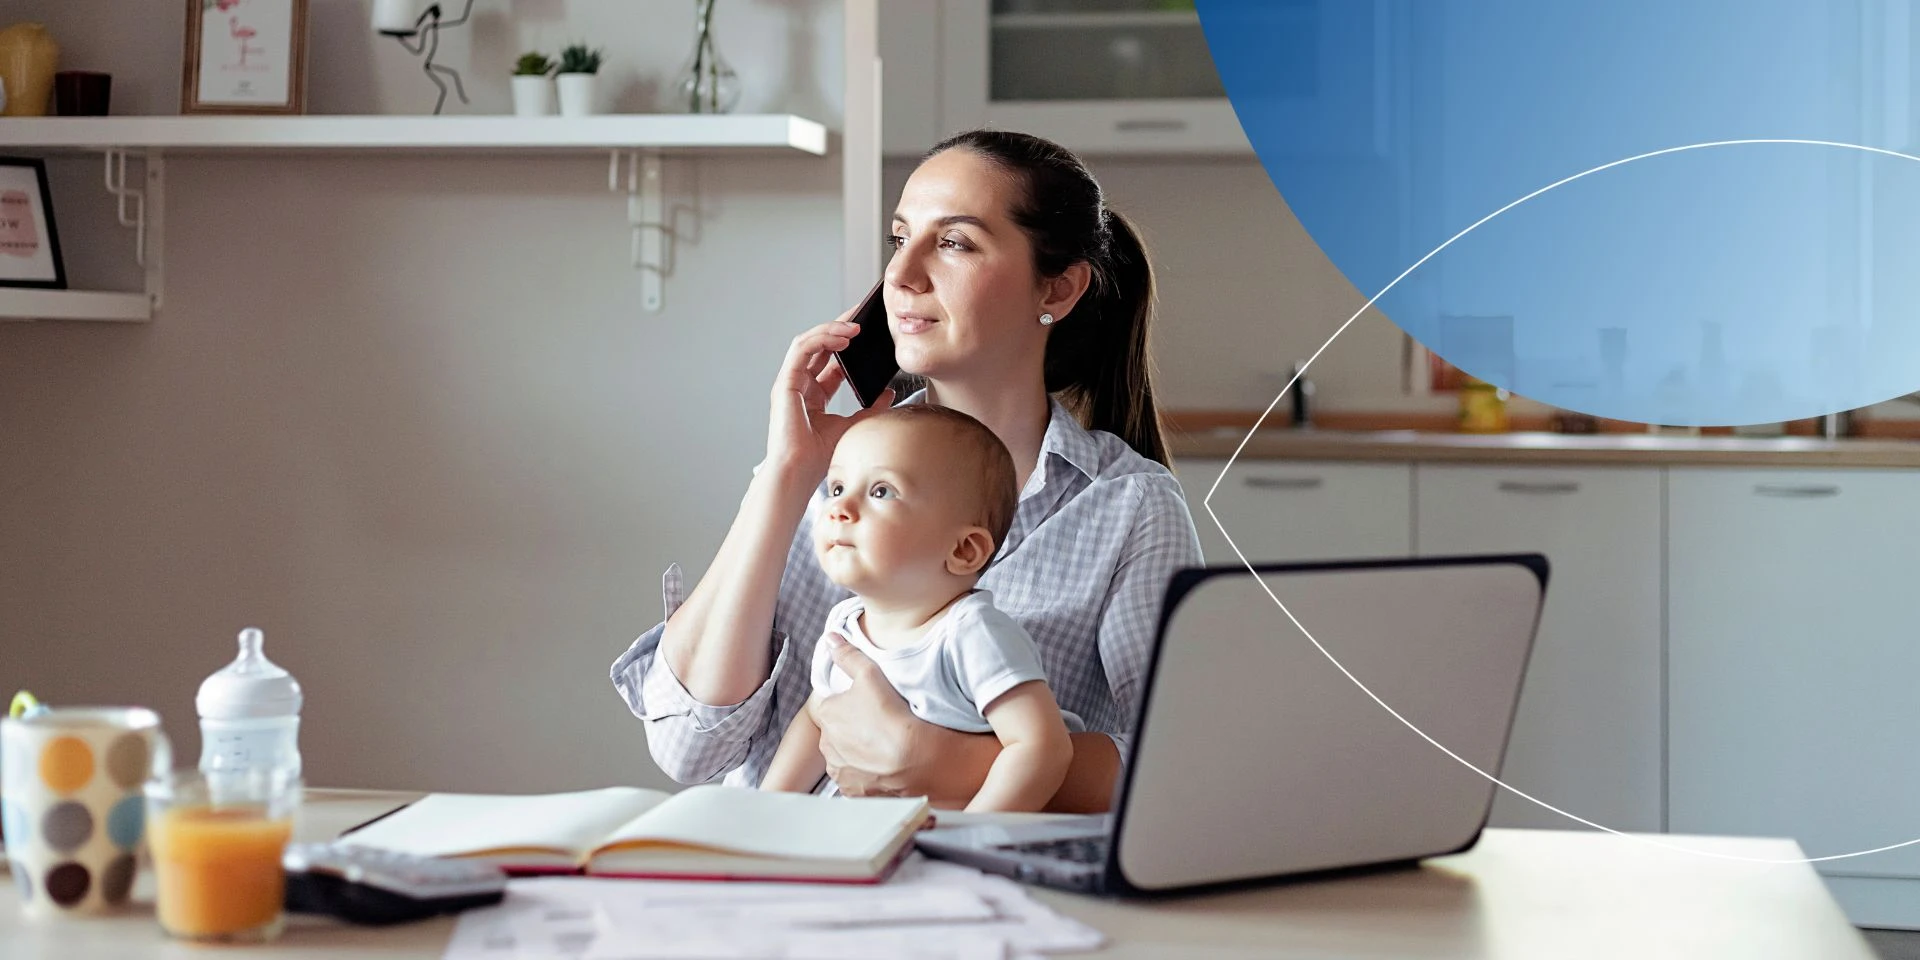 Woman sitting on a desk with laptop talking on the phone with a baby on her lap